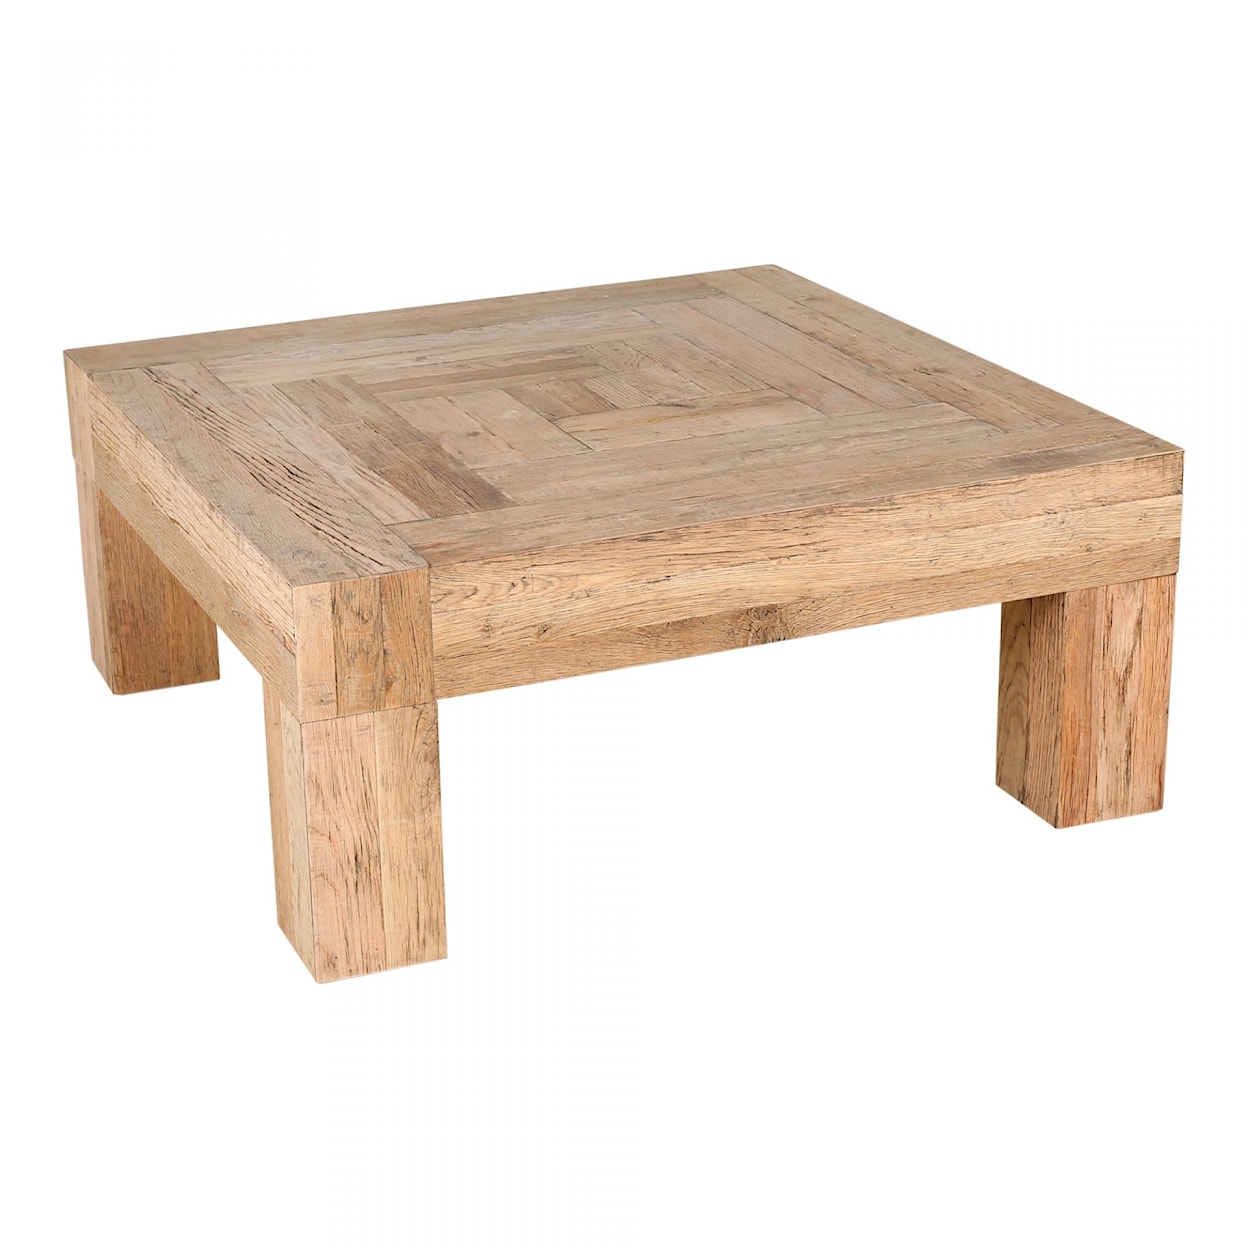 Moe's Home Collection Evander Coffee Table